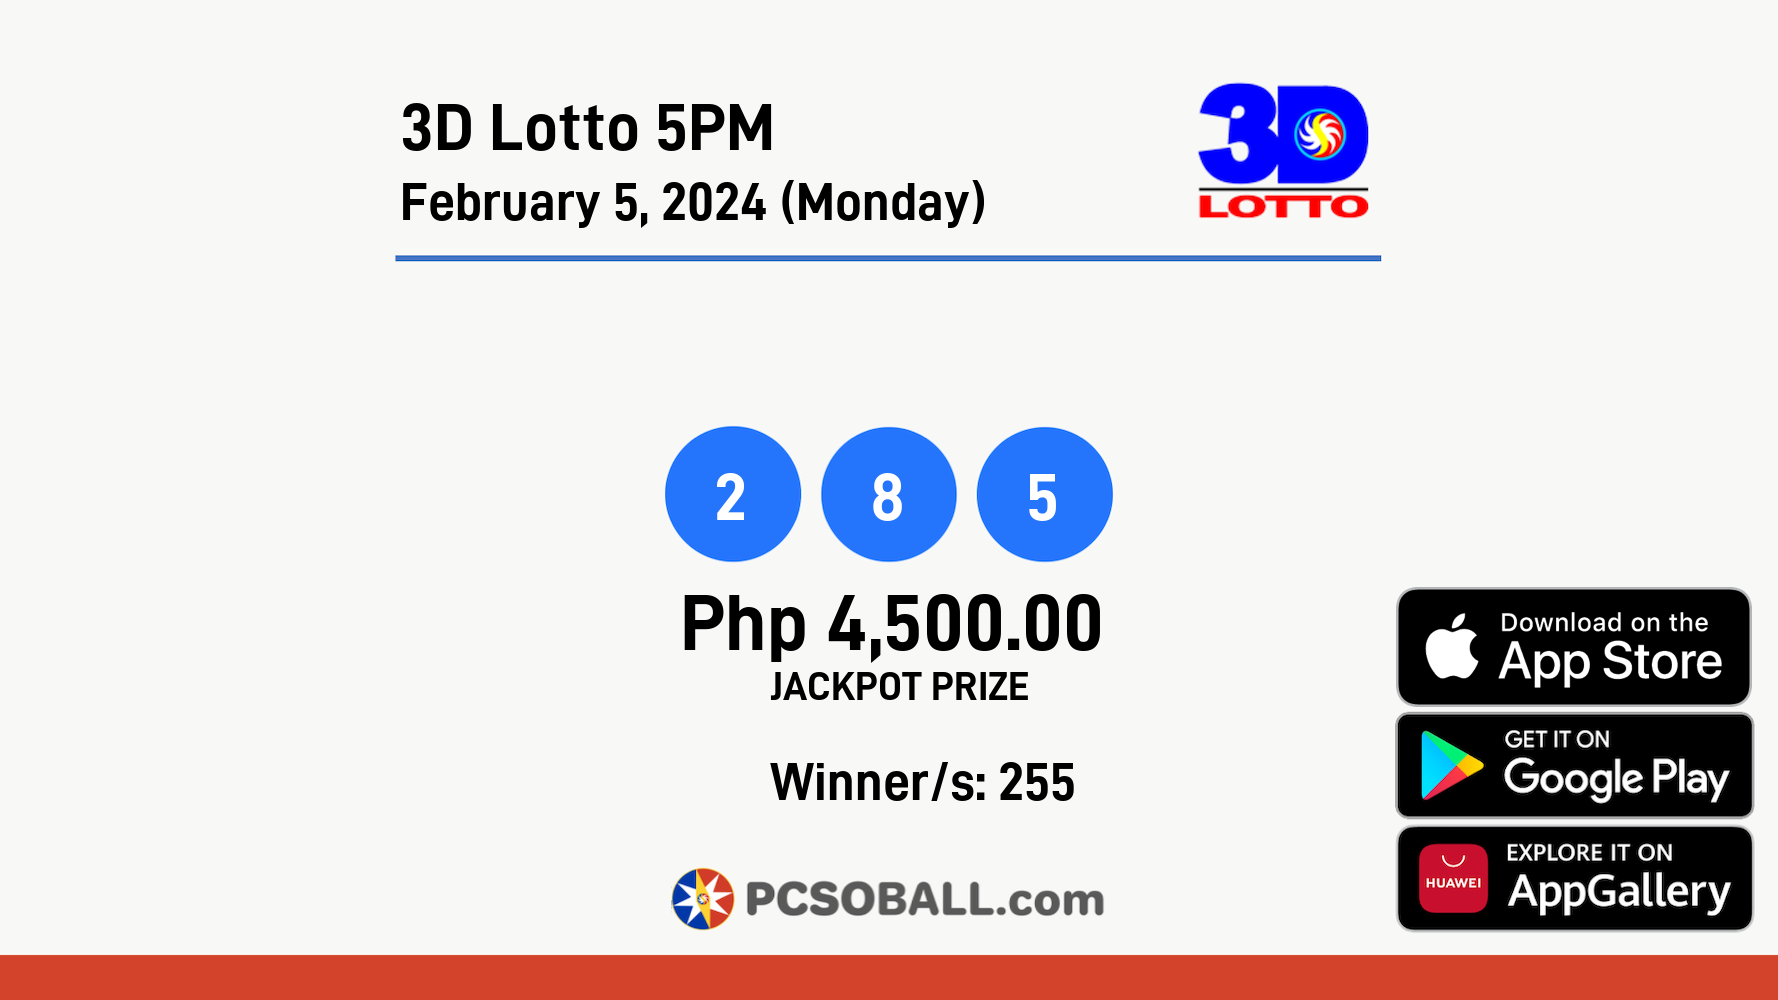 3D Lotto 5PM February 5, 2024 (Monday) Result